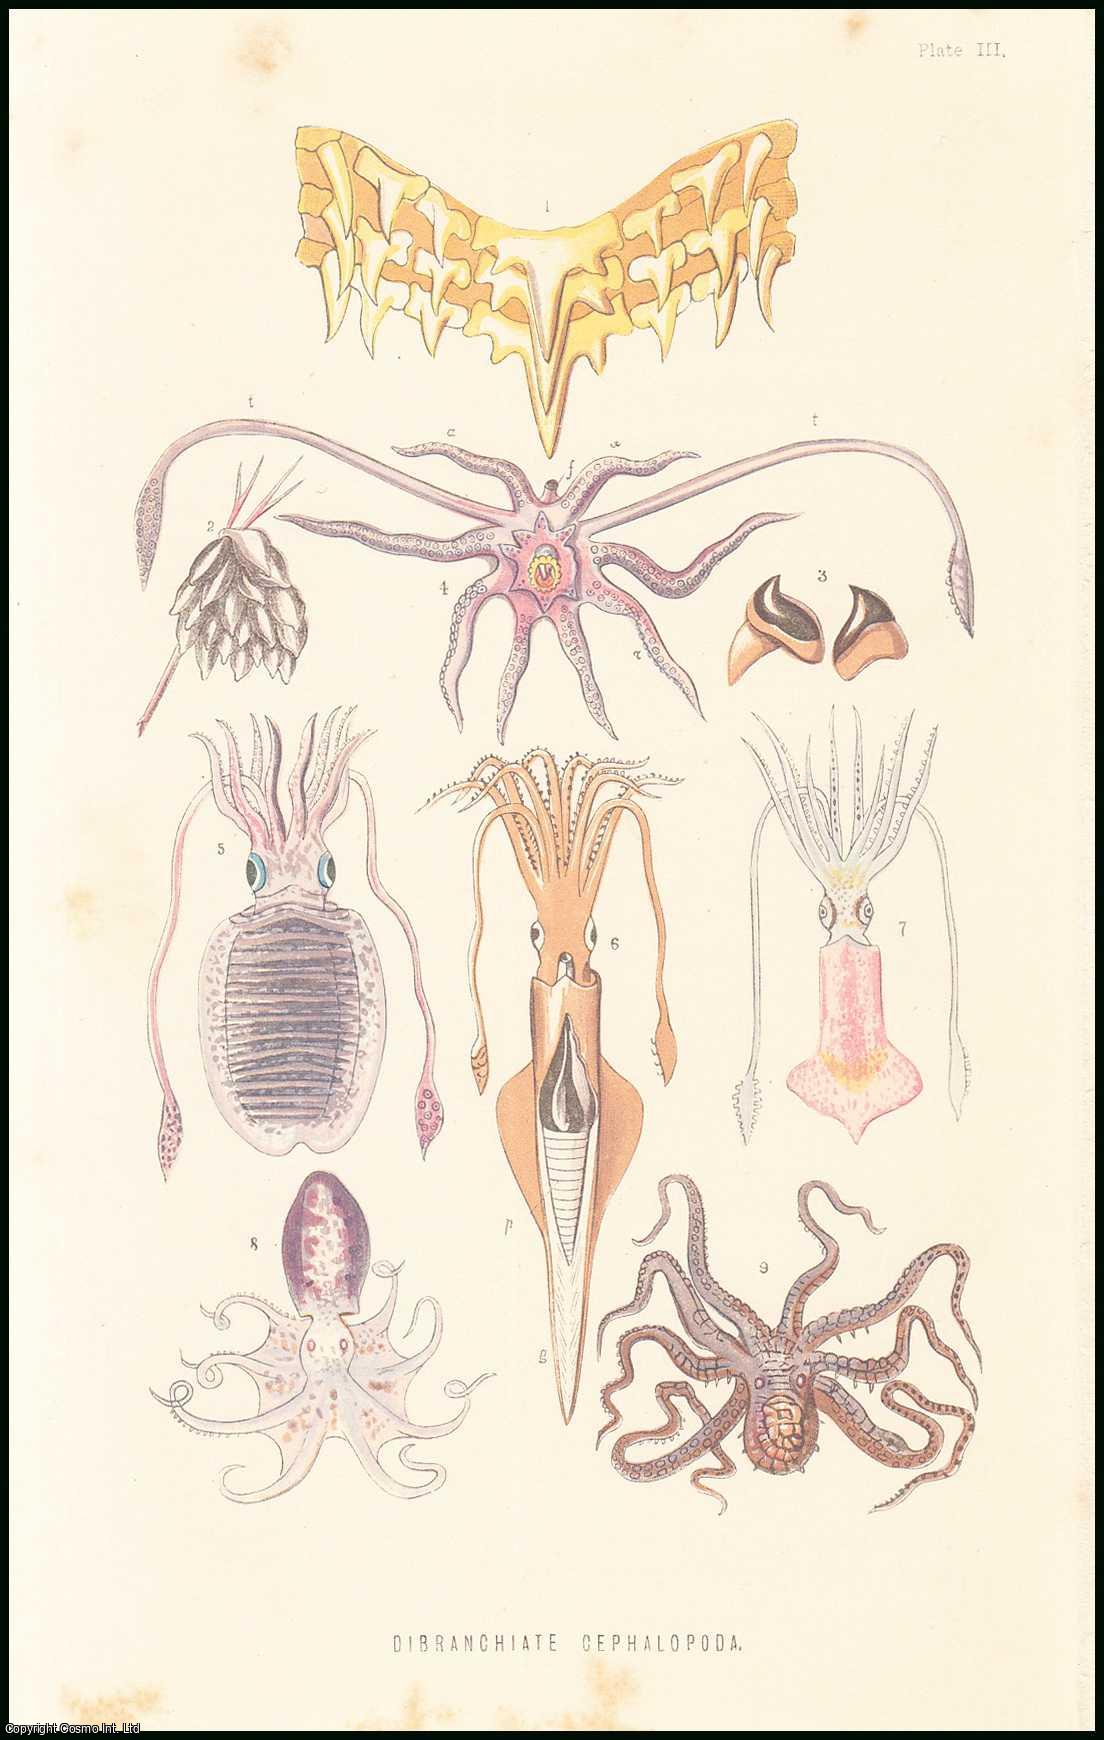 Henry Woodward, F.G.S., F.Z.S., of the British Museum. - The Pearly Nautilus (part 2), Cuttle-Fish, & their Allies. An uncommon original article from the Student and Intellectual Observer of Science Literature & Art, 1870.